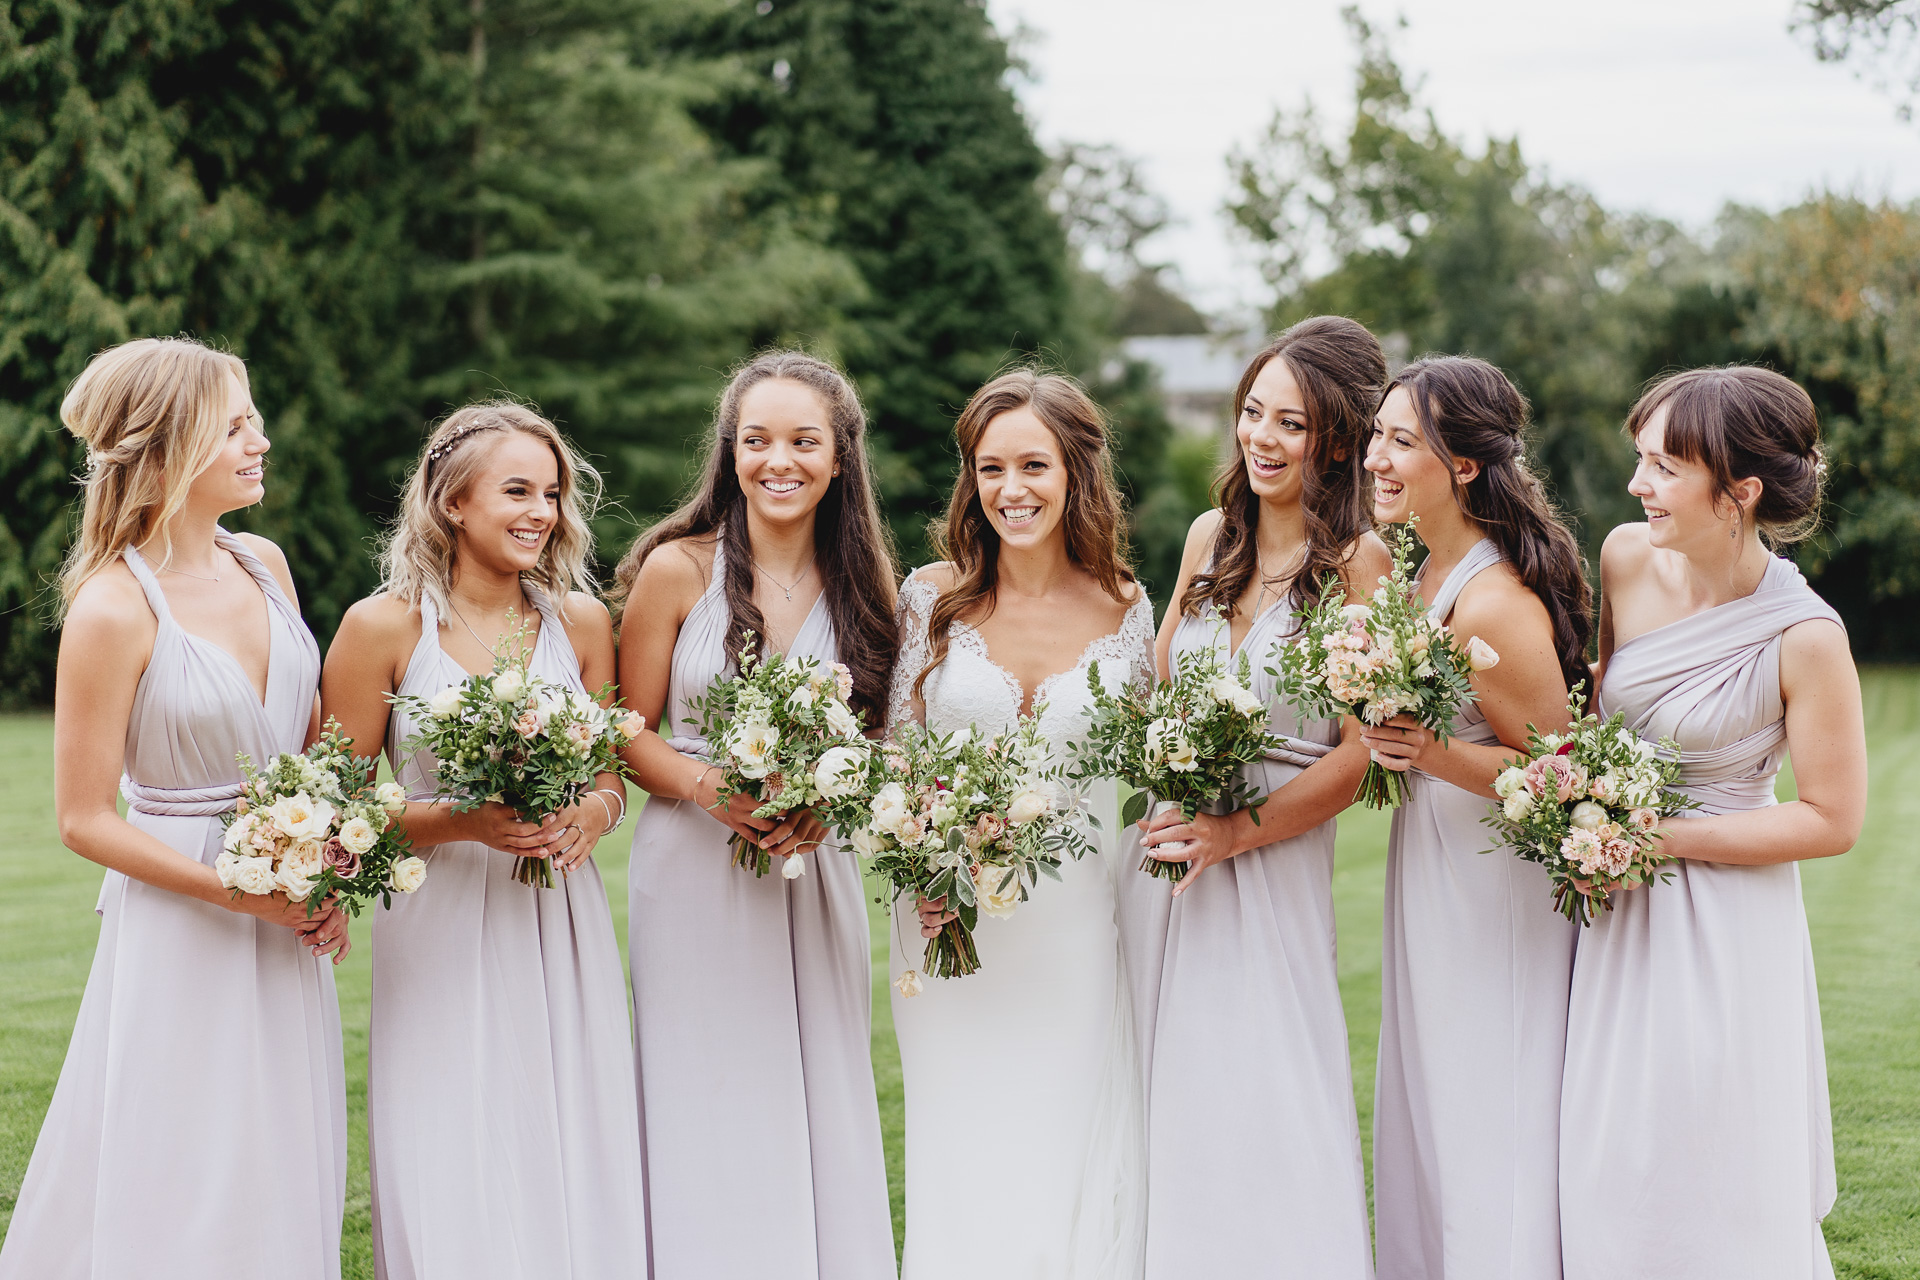 Bride and bridesmaids group shot on the grass with trees behind